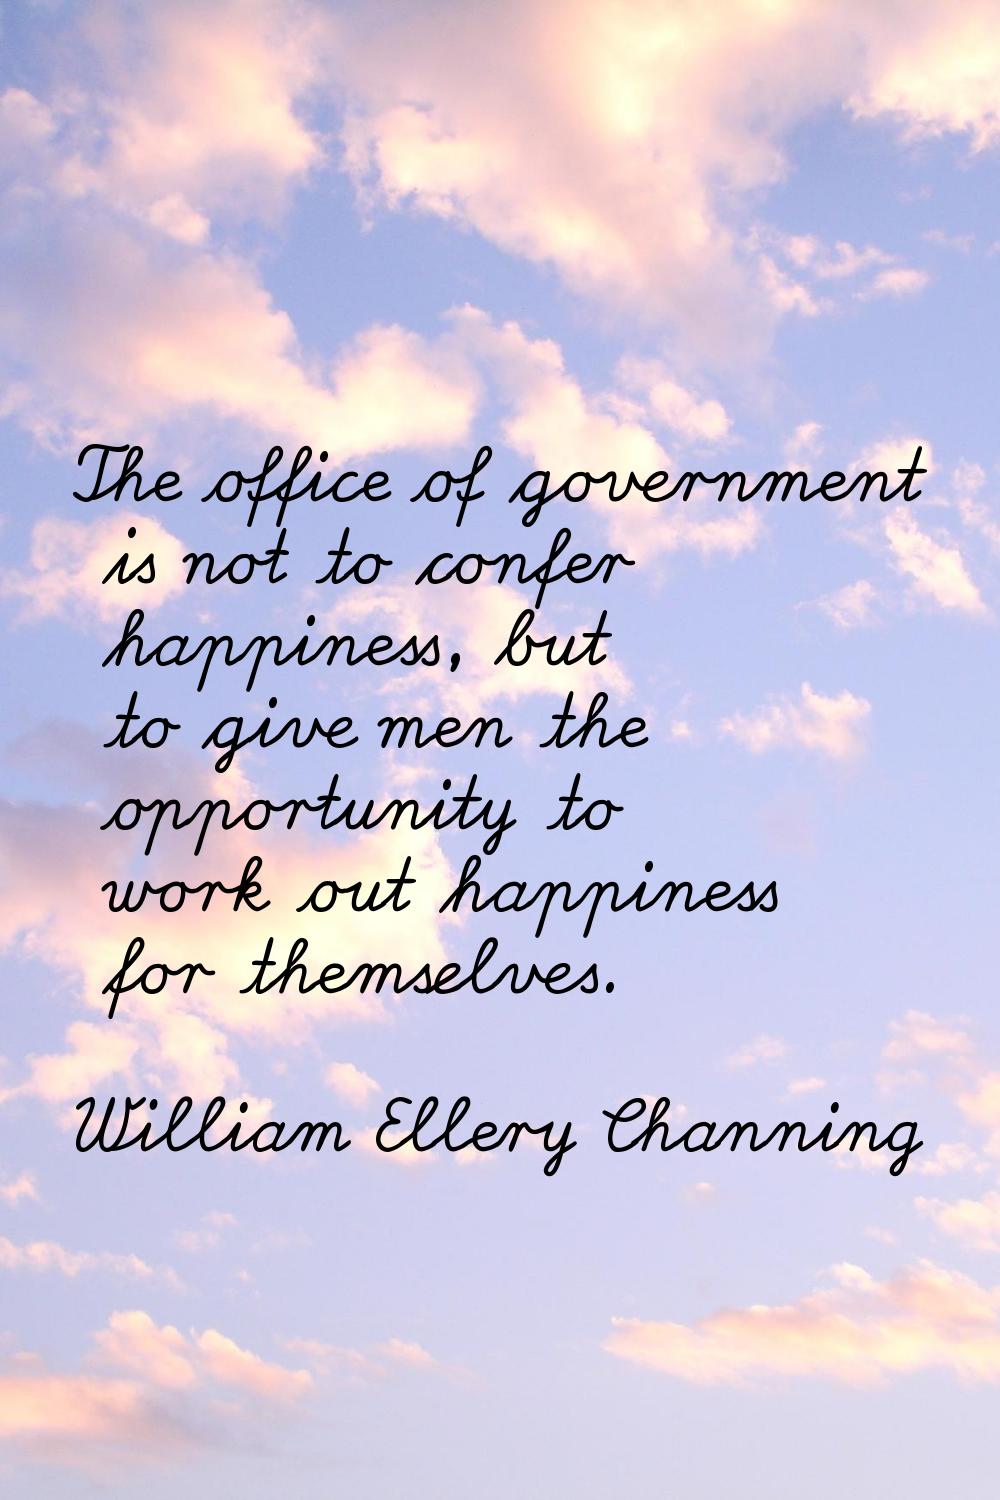 The office of government is not to confer happiness, but to give men the opportunity to work out ha